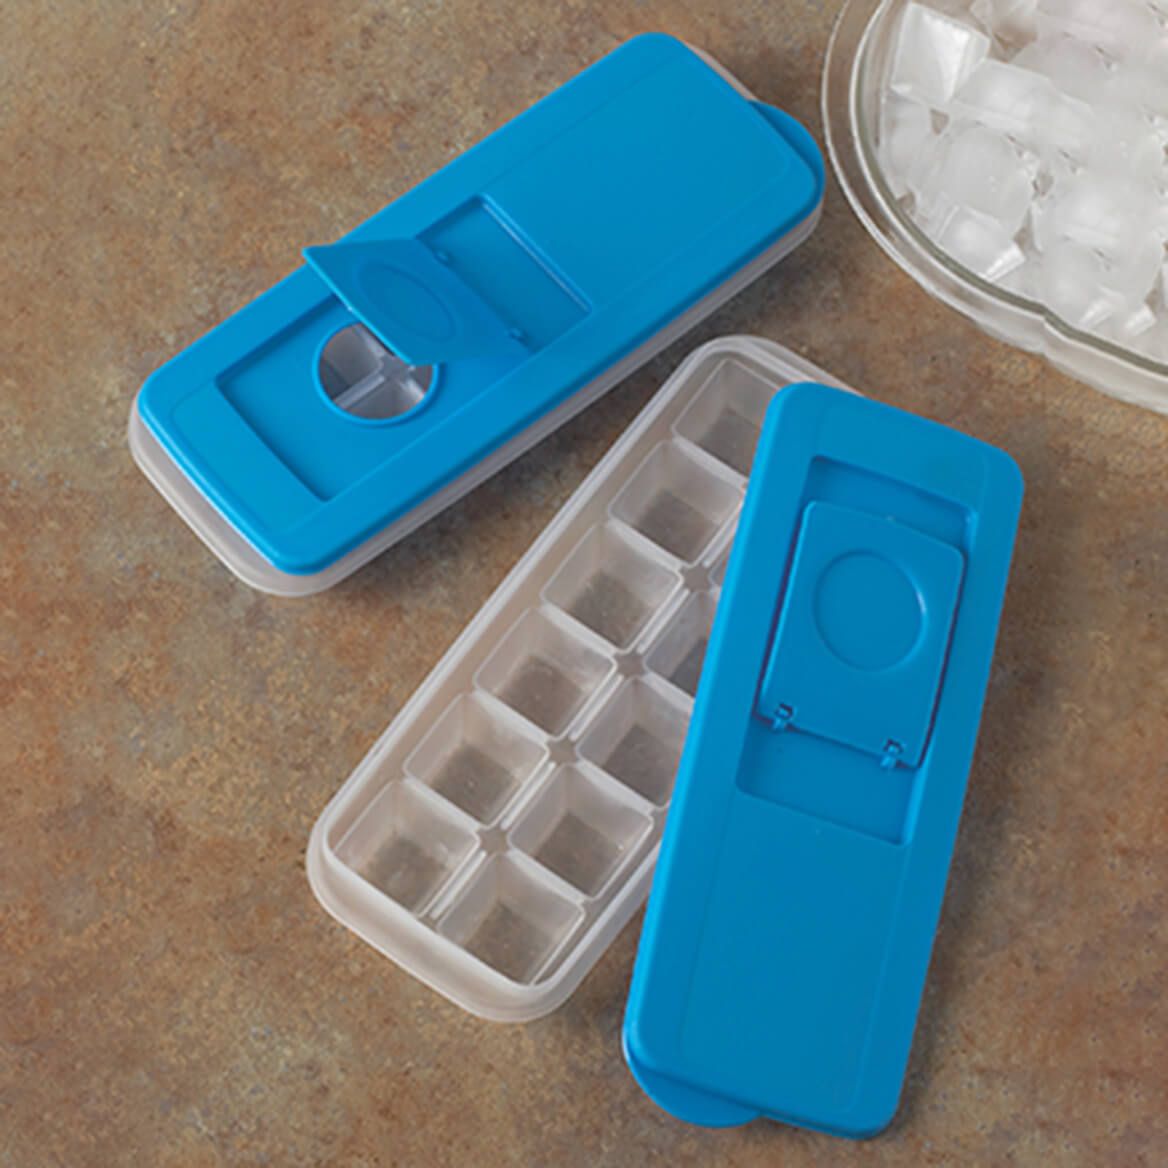 Easy to Fill Covered Ice Cube Trays, Set of 2 + '-' + 372017